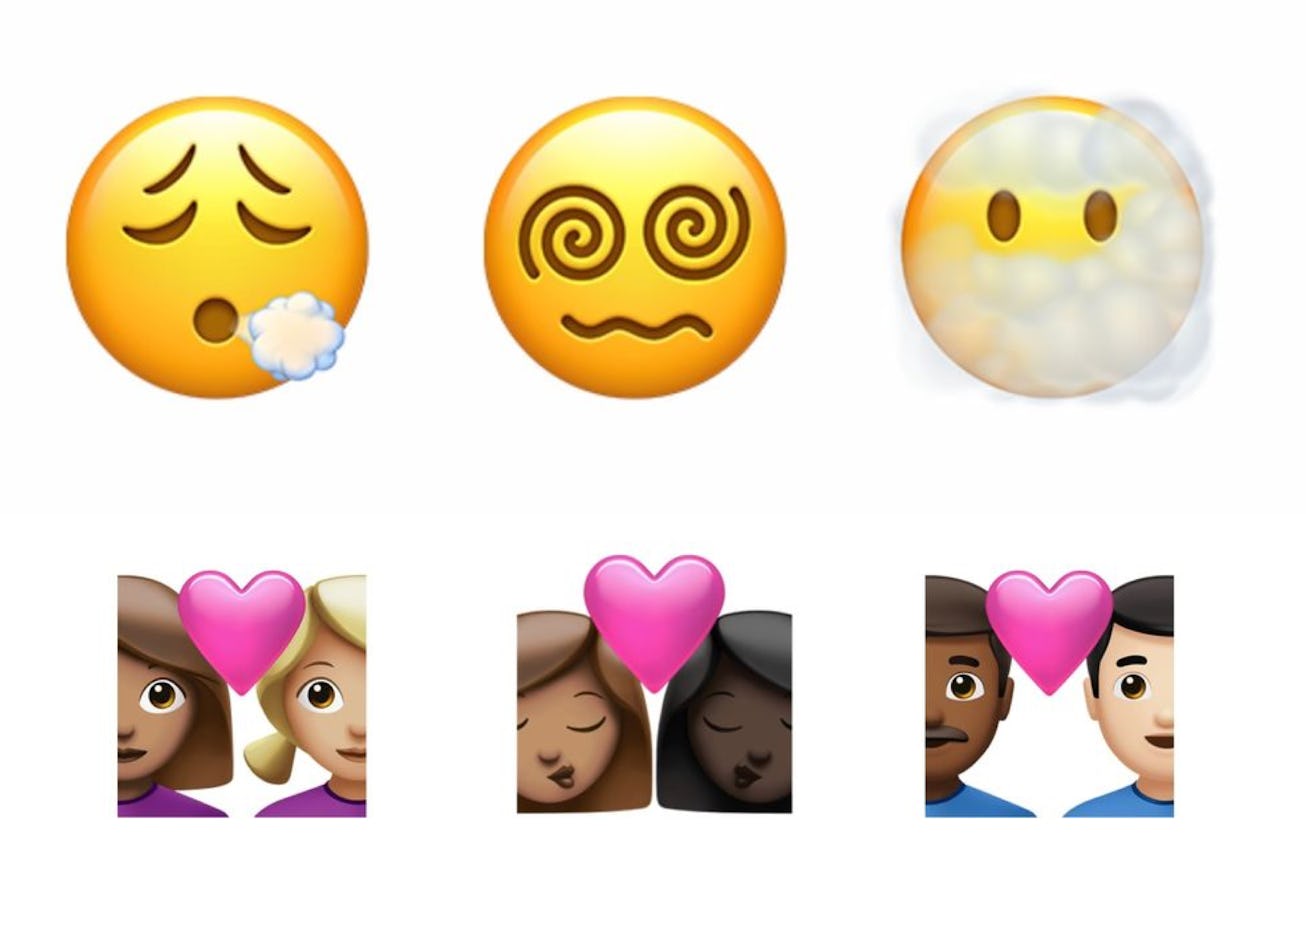 Apple's new batch of emoji include a vaccine, exhaling face and many new skin tone combinations.